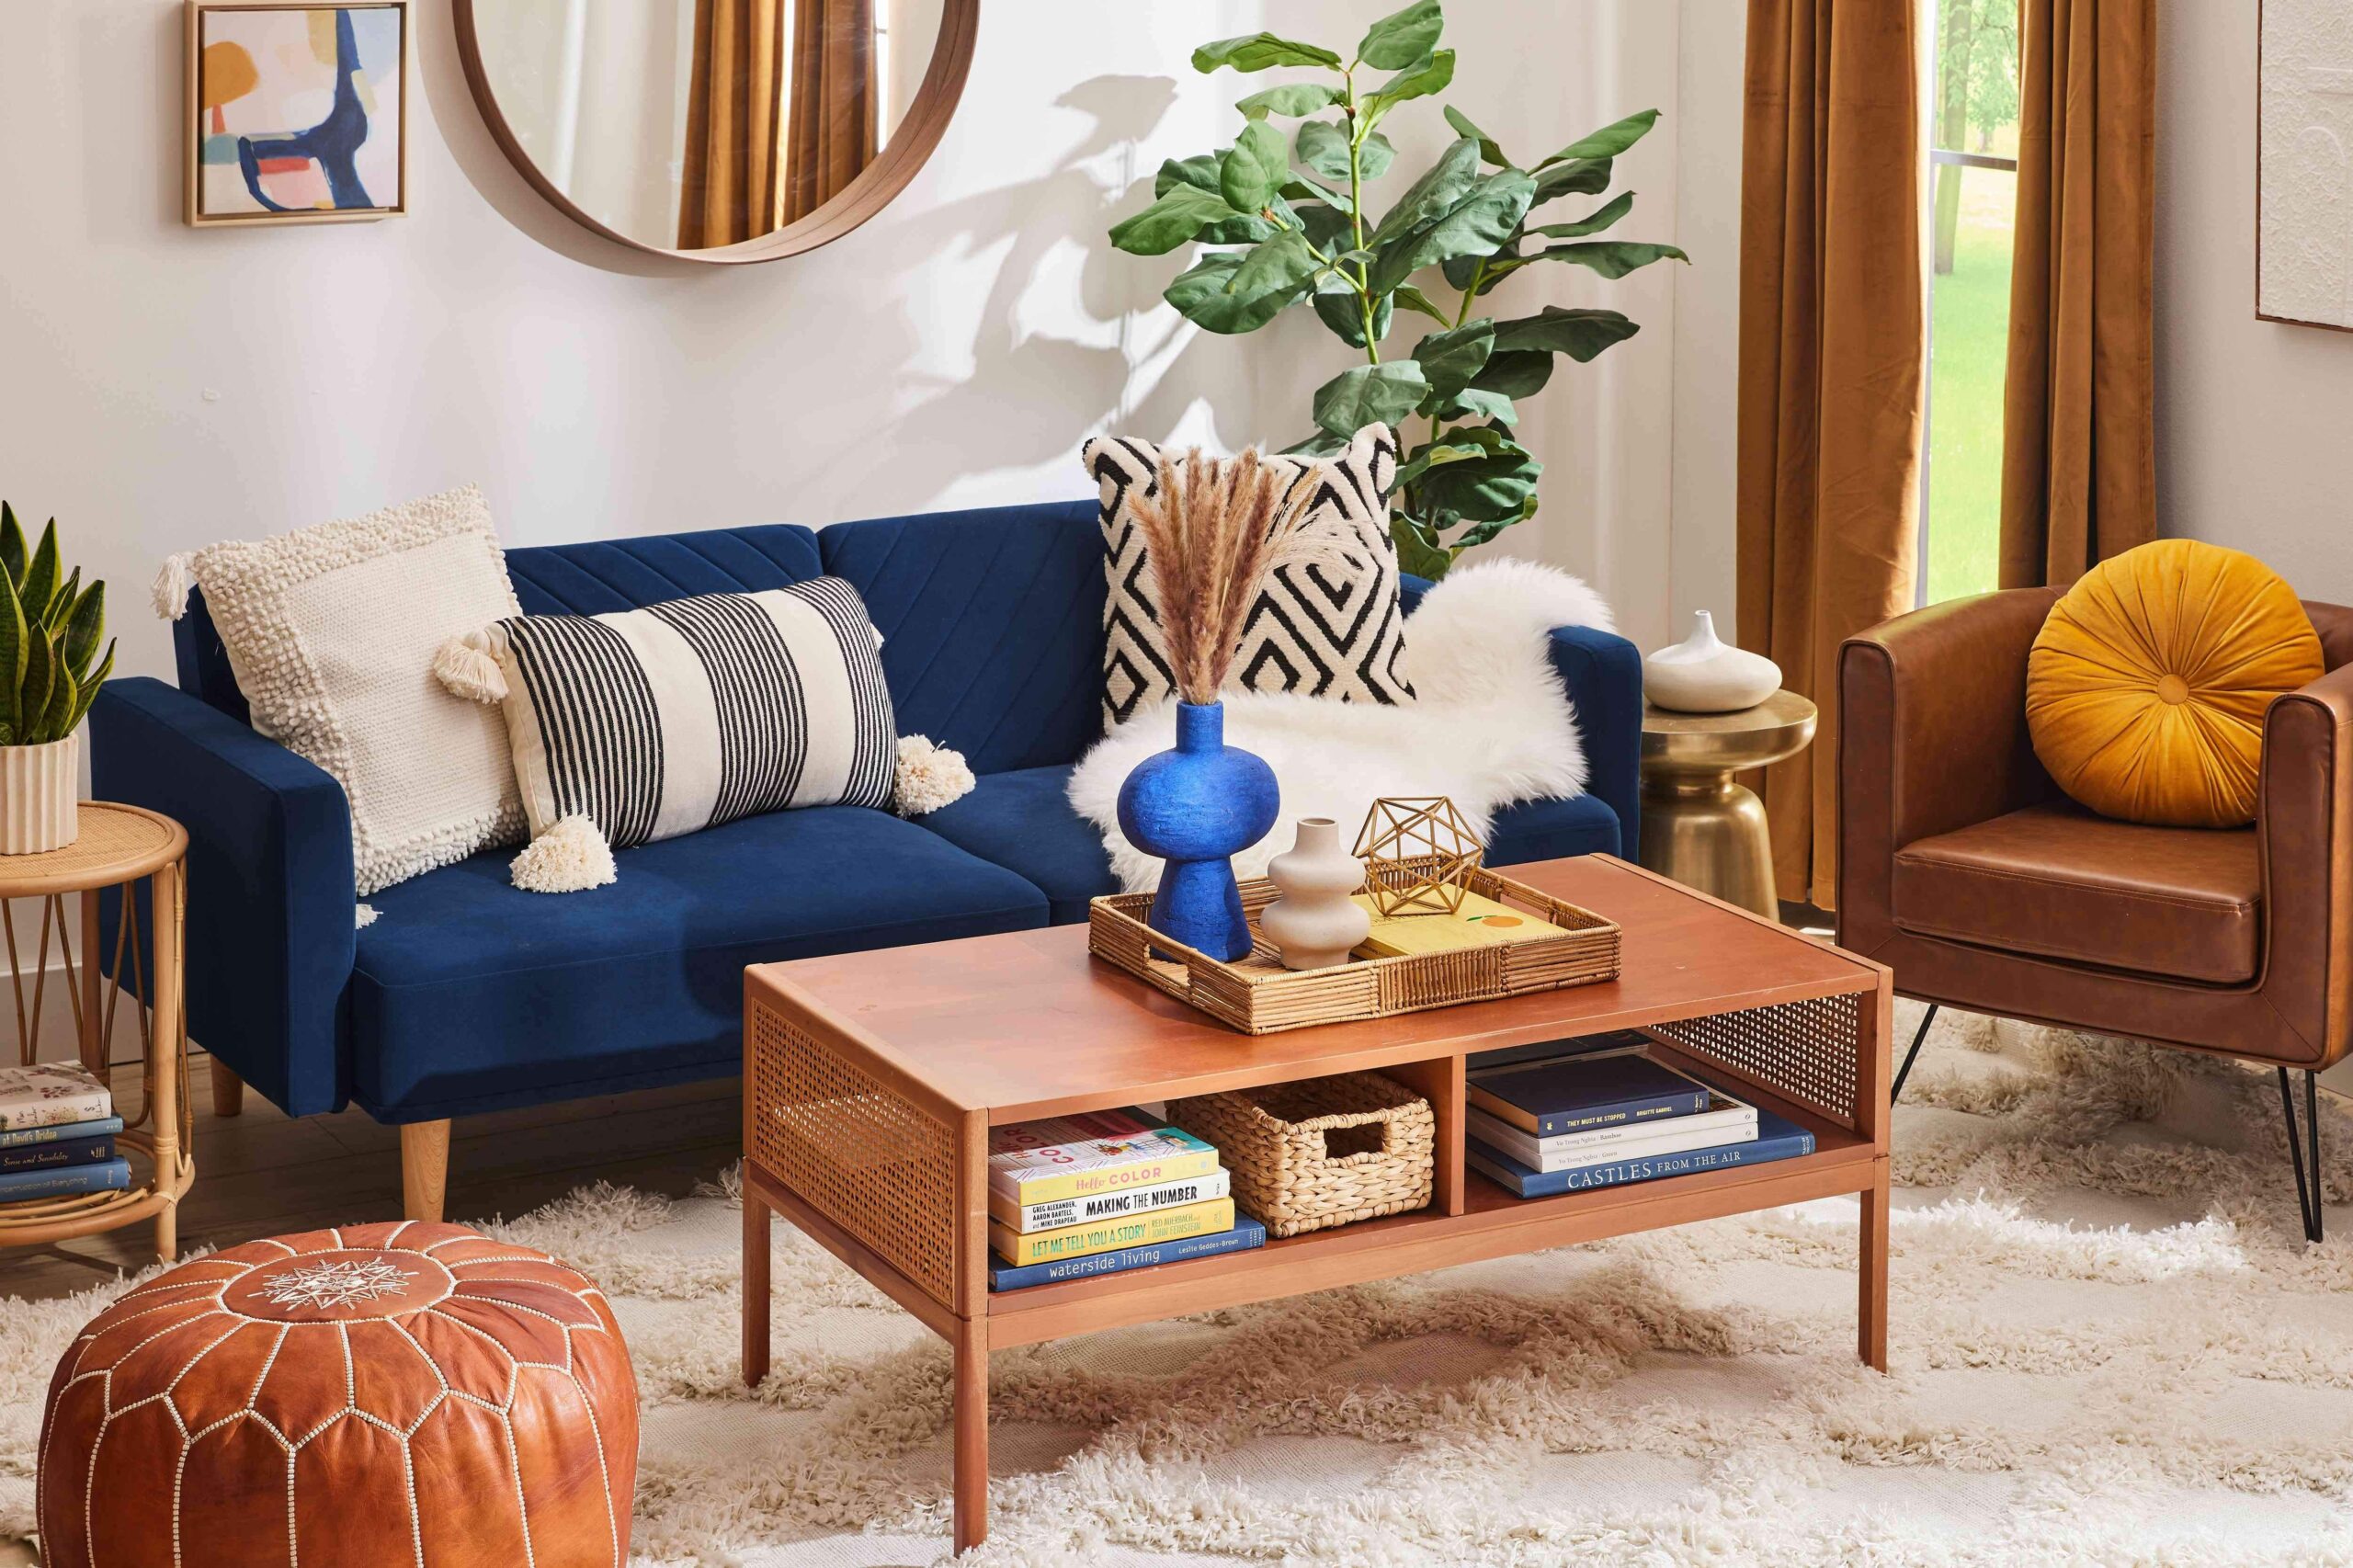 9 Design Tips For Blue Couches In Living Rooms throughout Navy Blue Couches Living Room